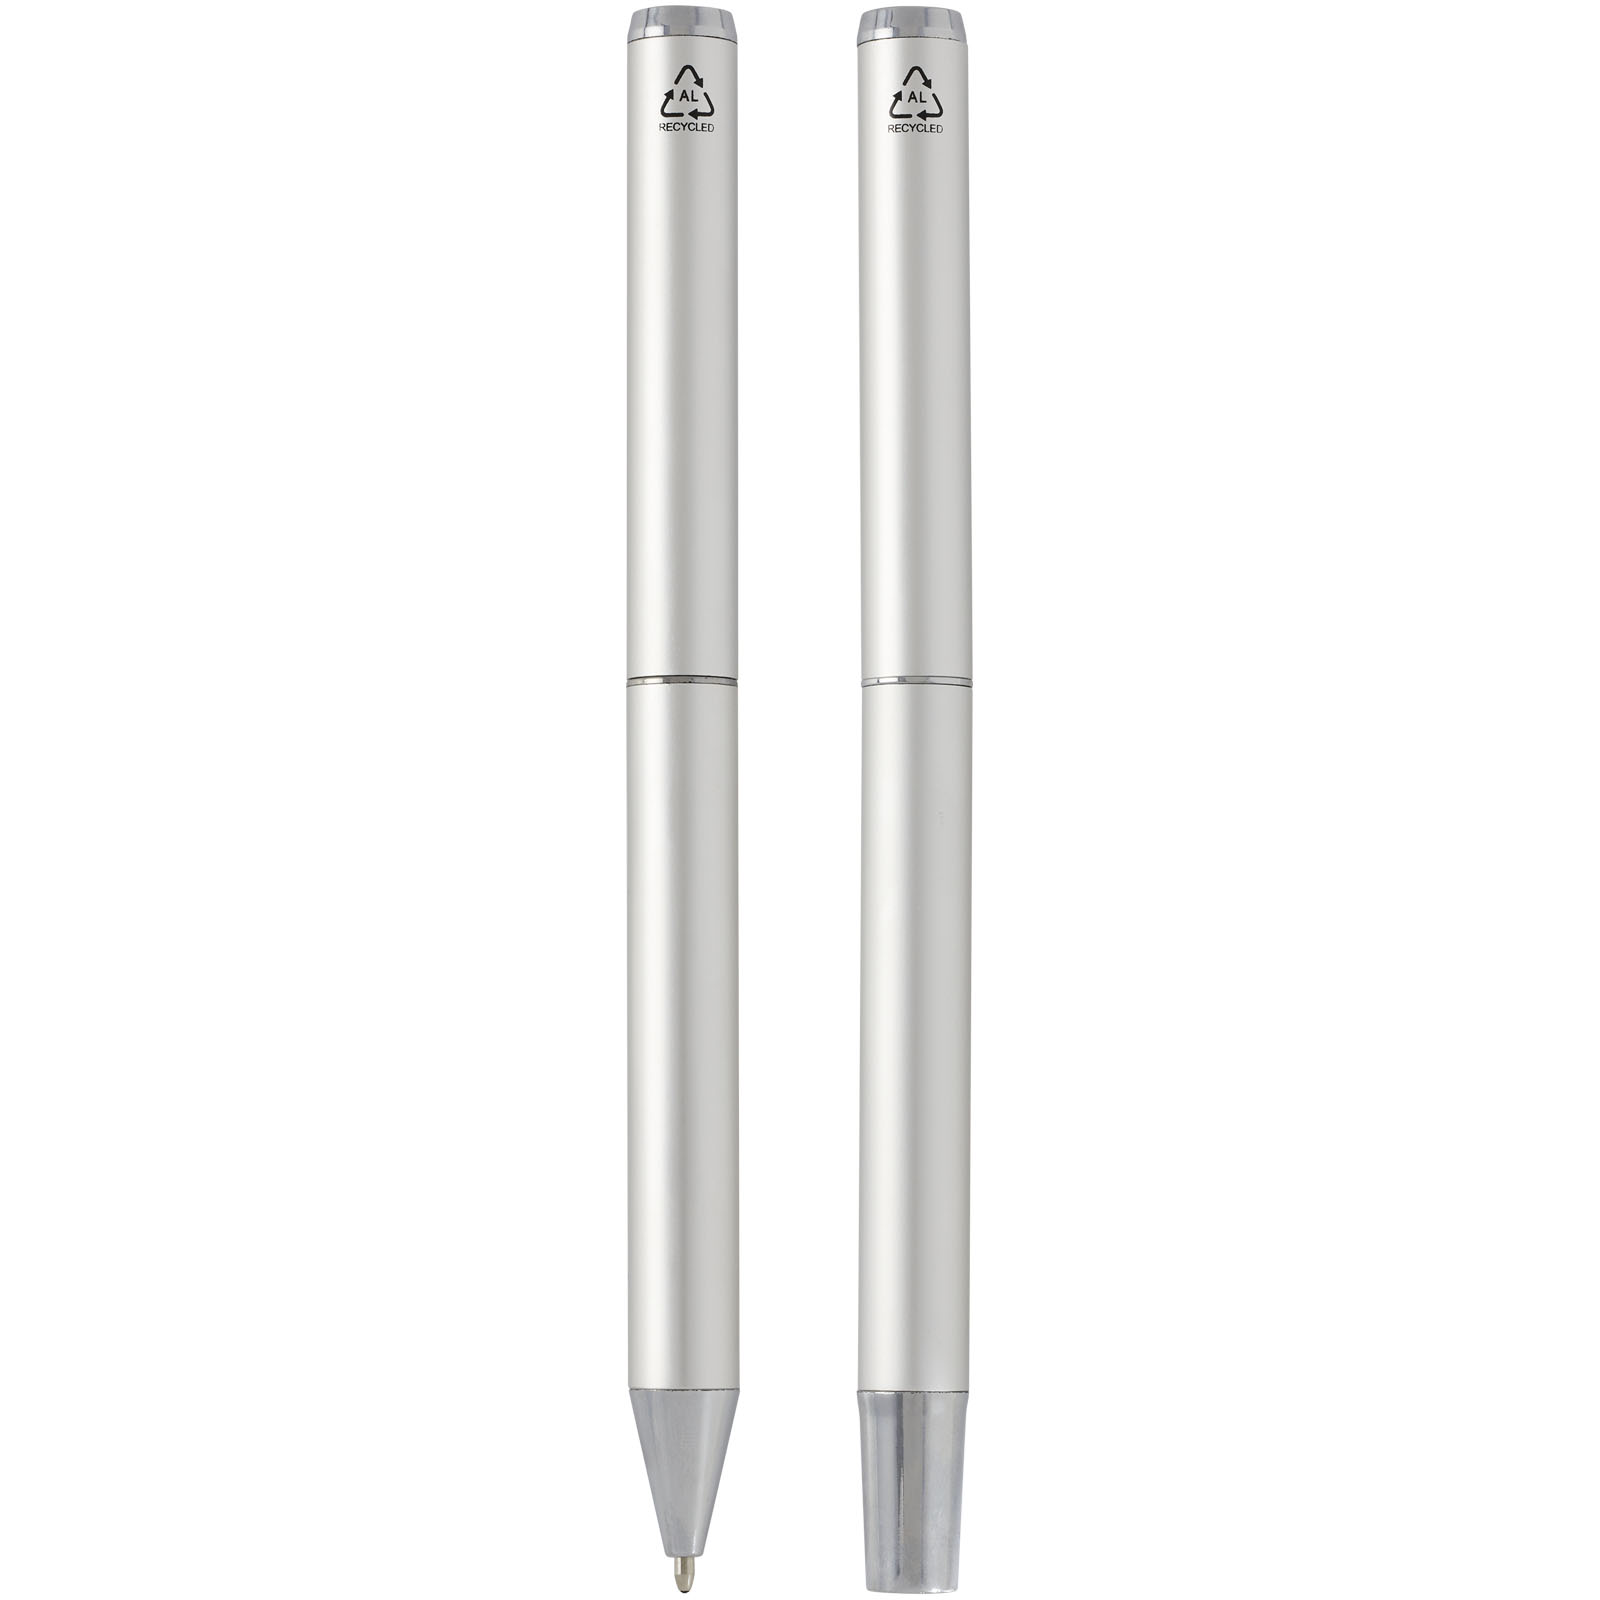 Advertising Gift sets - Lucetto recycled aluminium ballpoint and rollerball pen gift set - 3